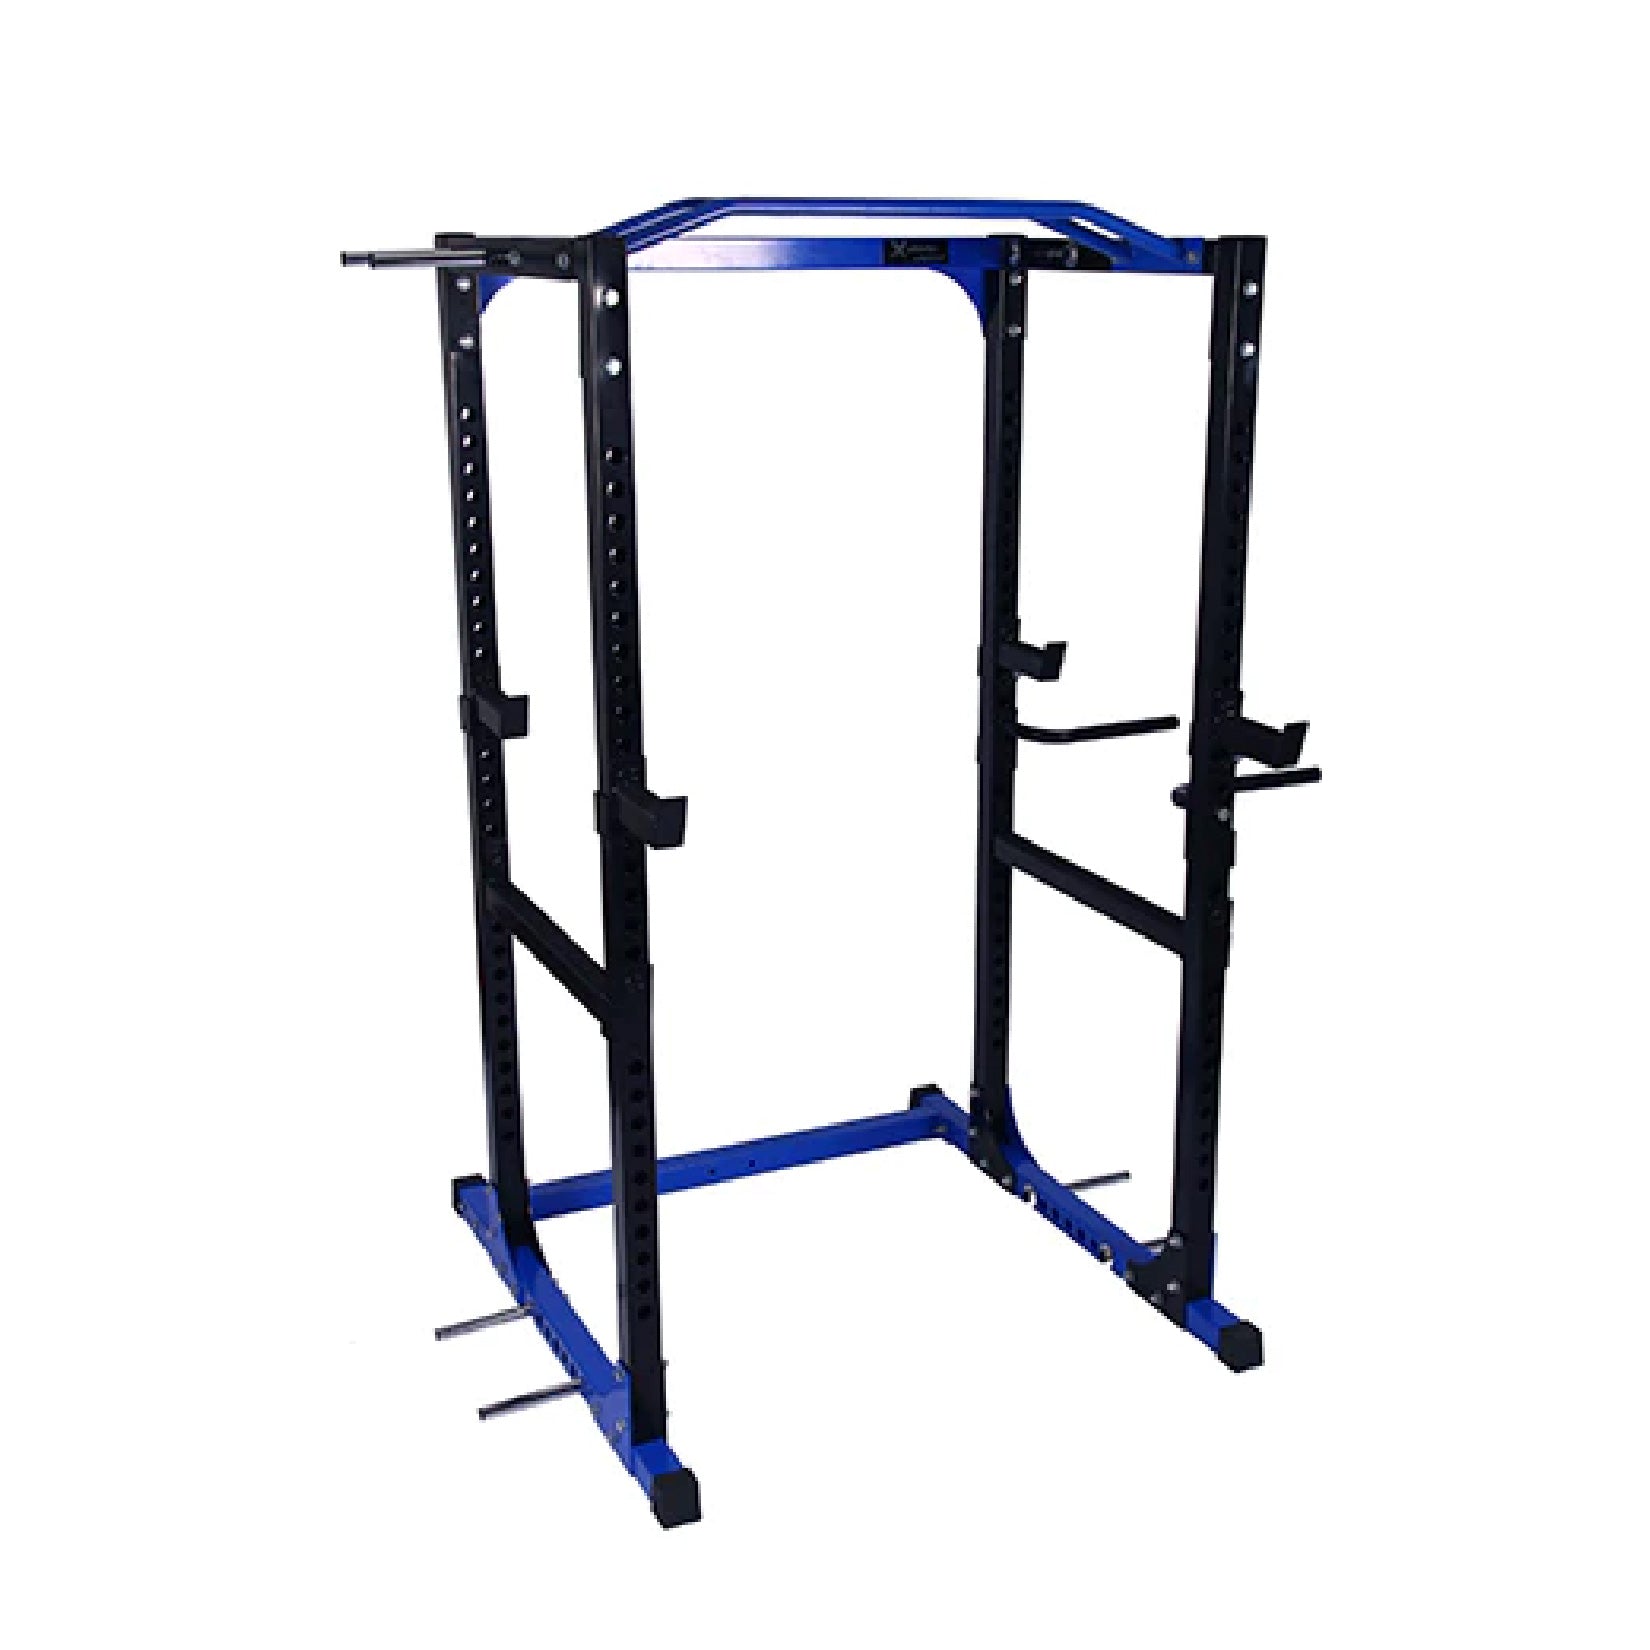 Progression 230 Power Cage-Weight Lifting Cage-Progression Fitness-1